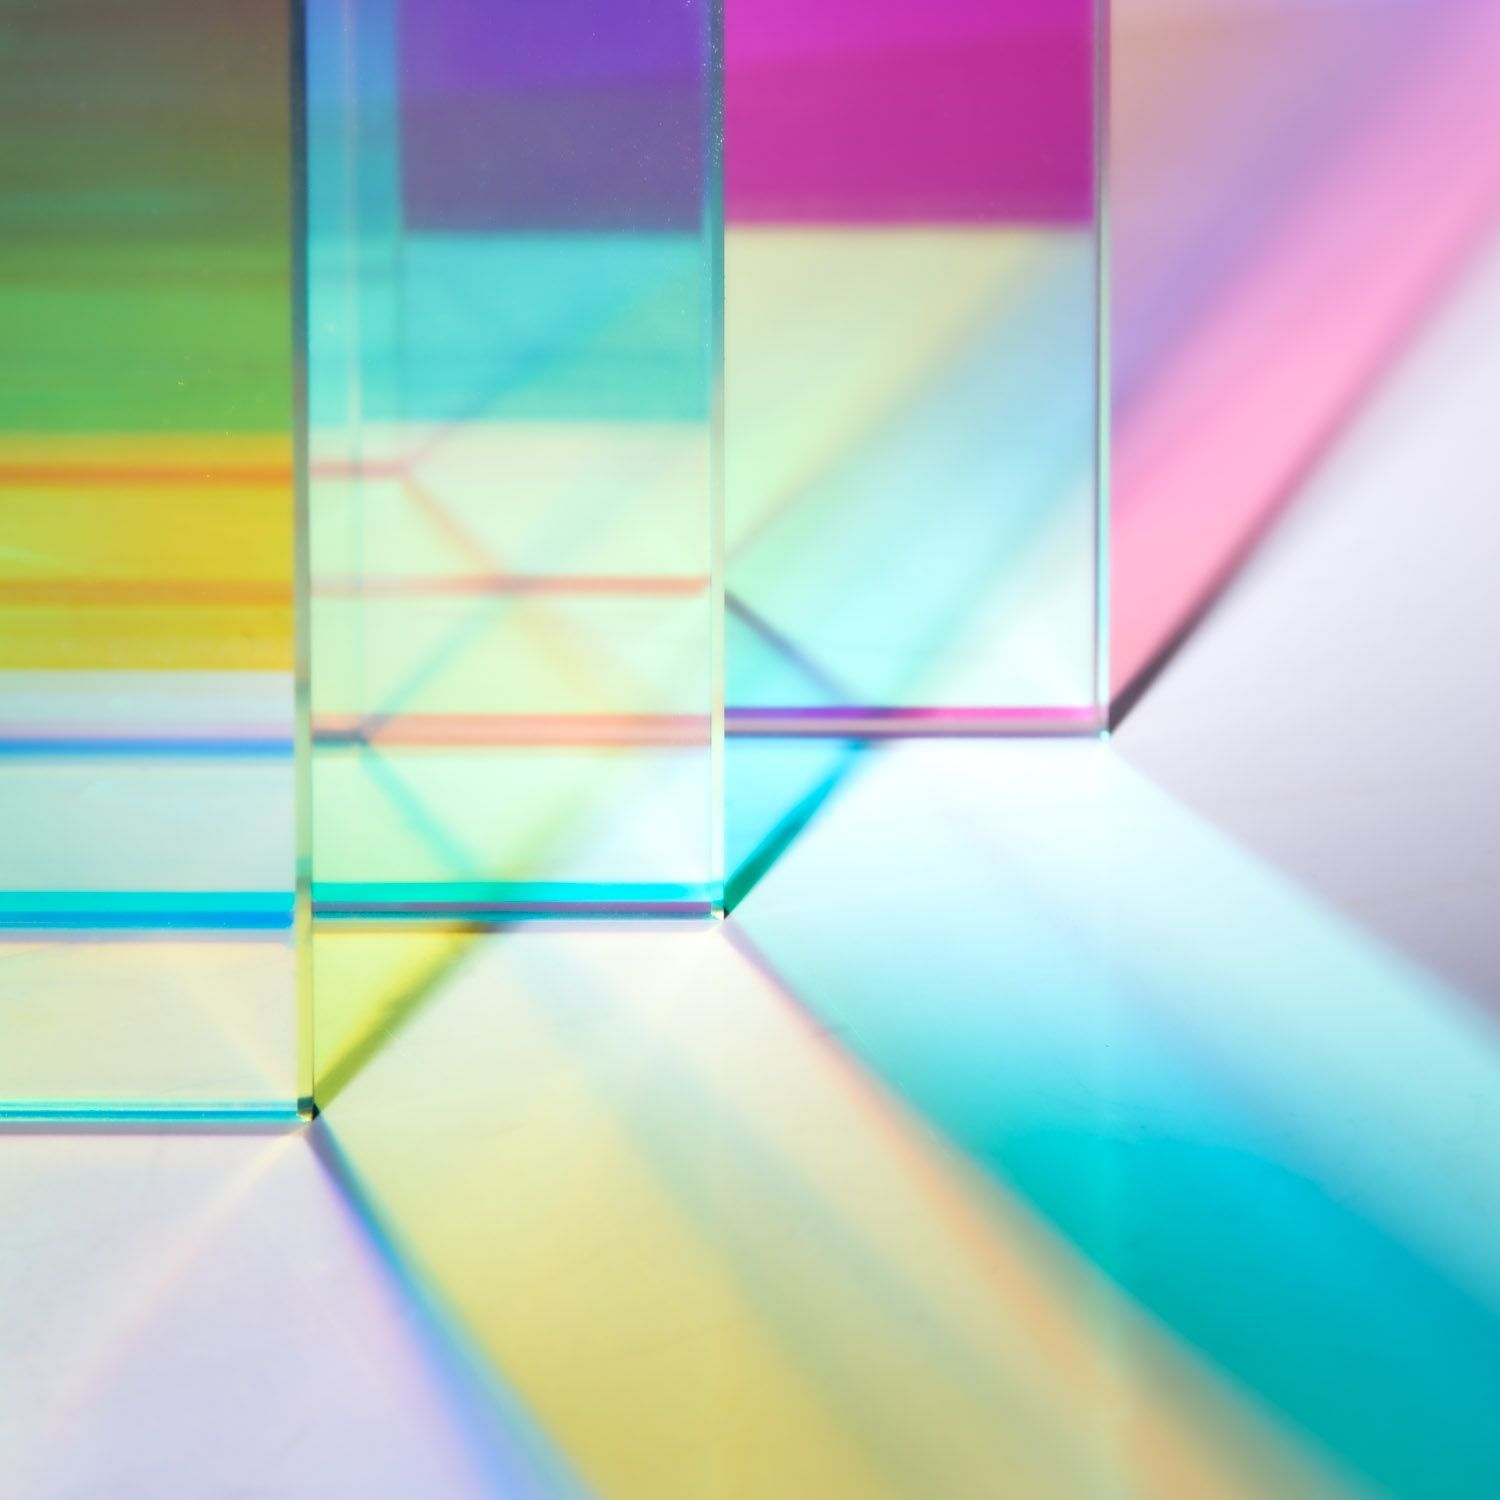 Dichroic glass panels in an array of pastel colors.